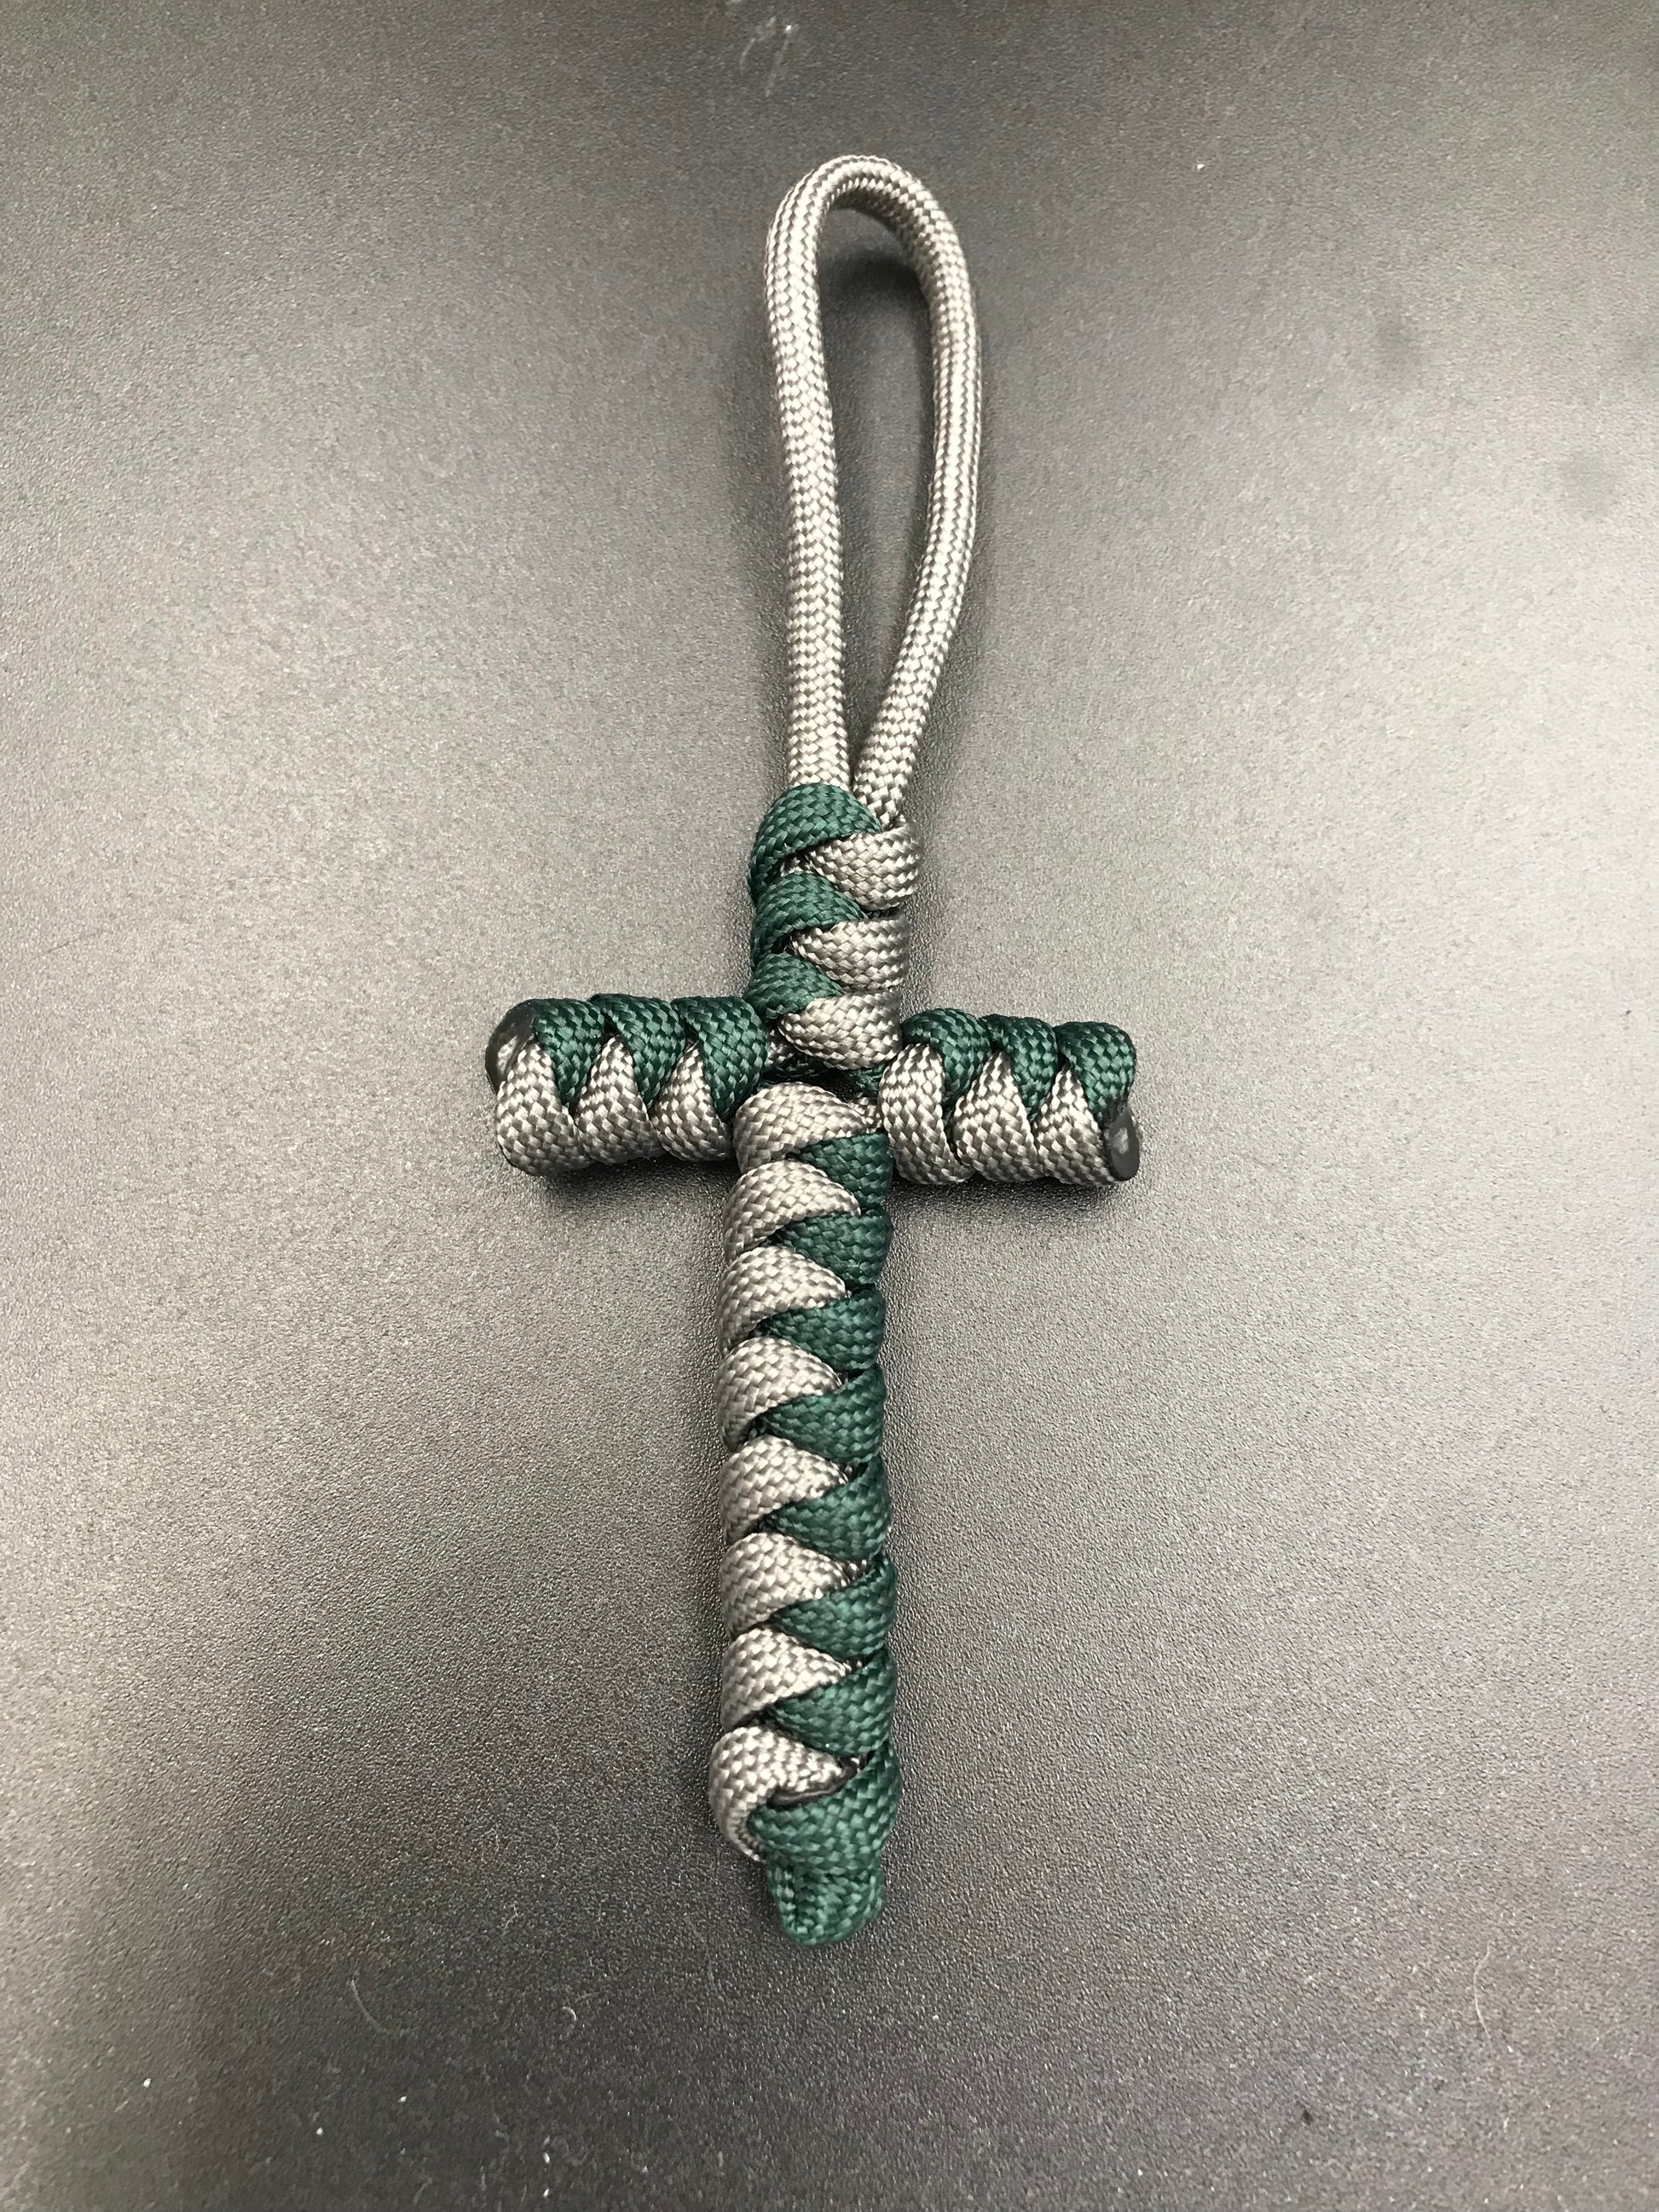 Handmade Paracord cross crucifix pendant in Grey and emerald green